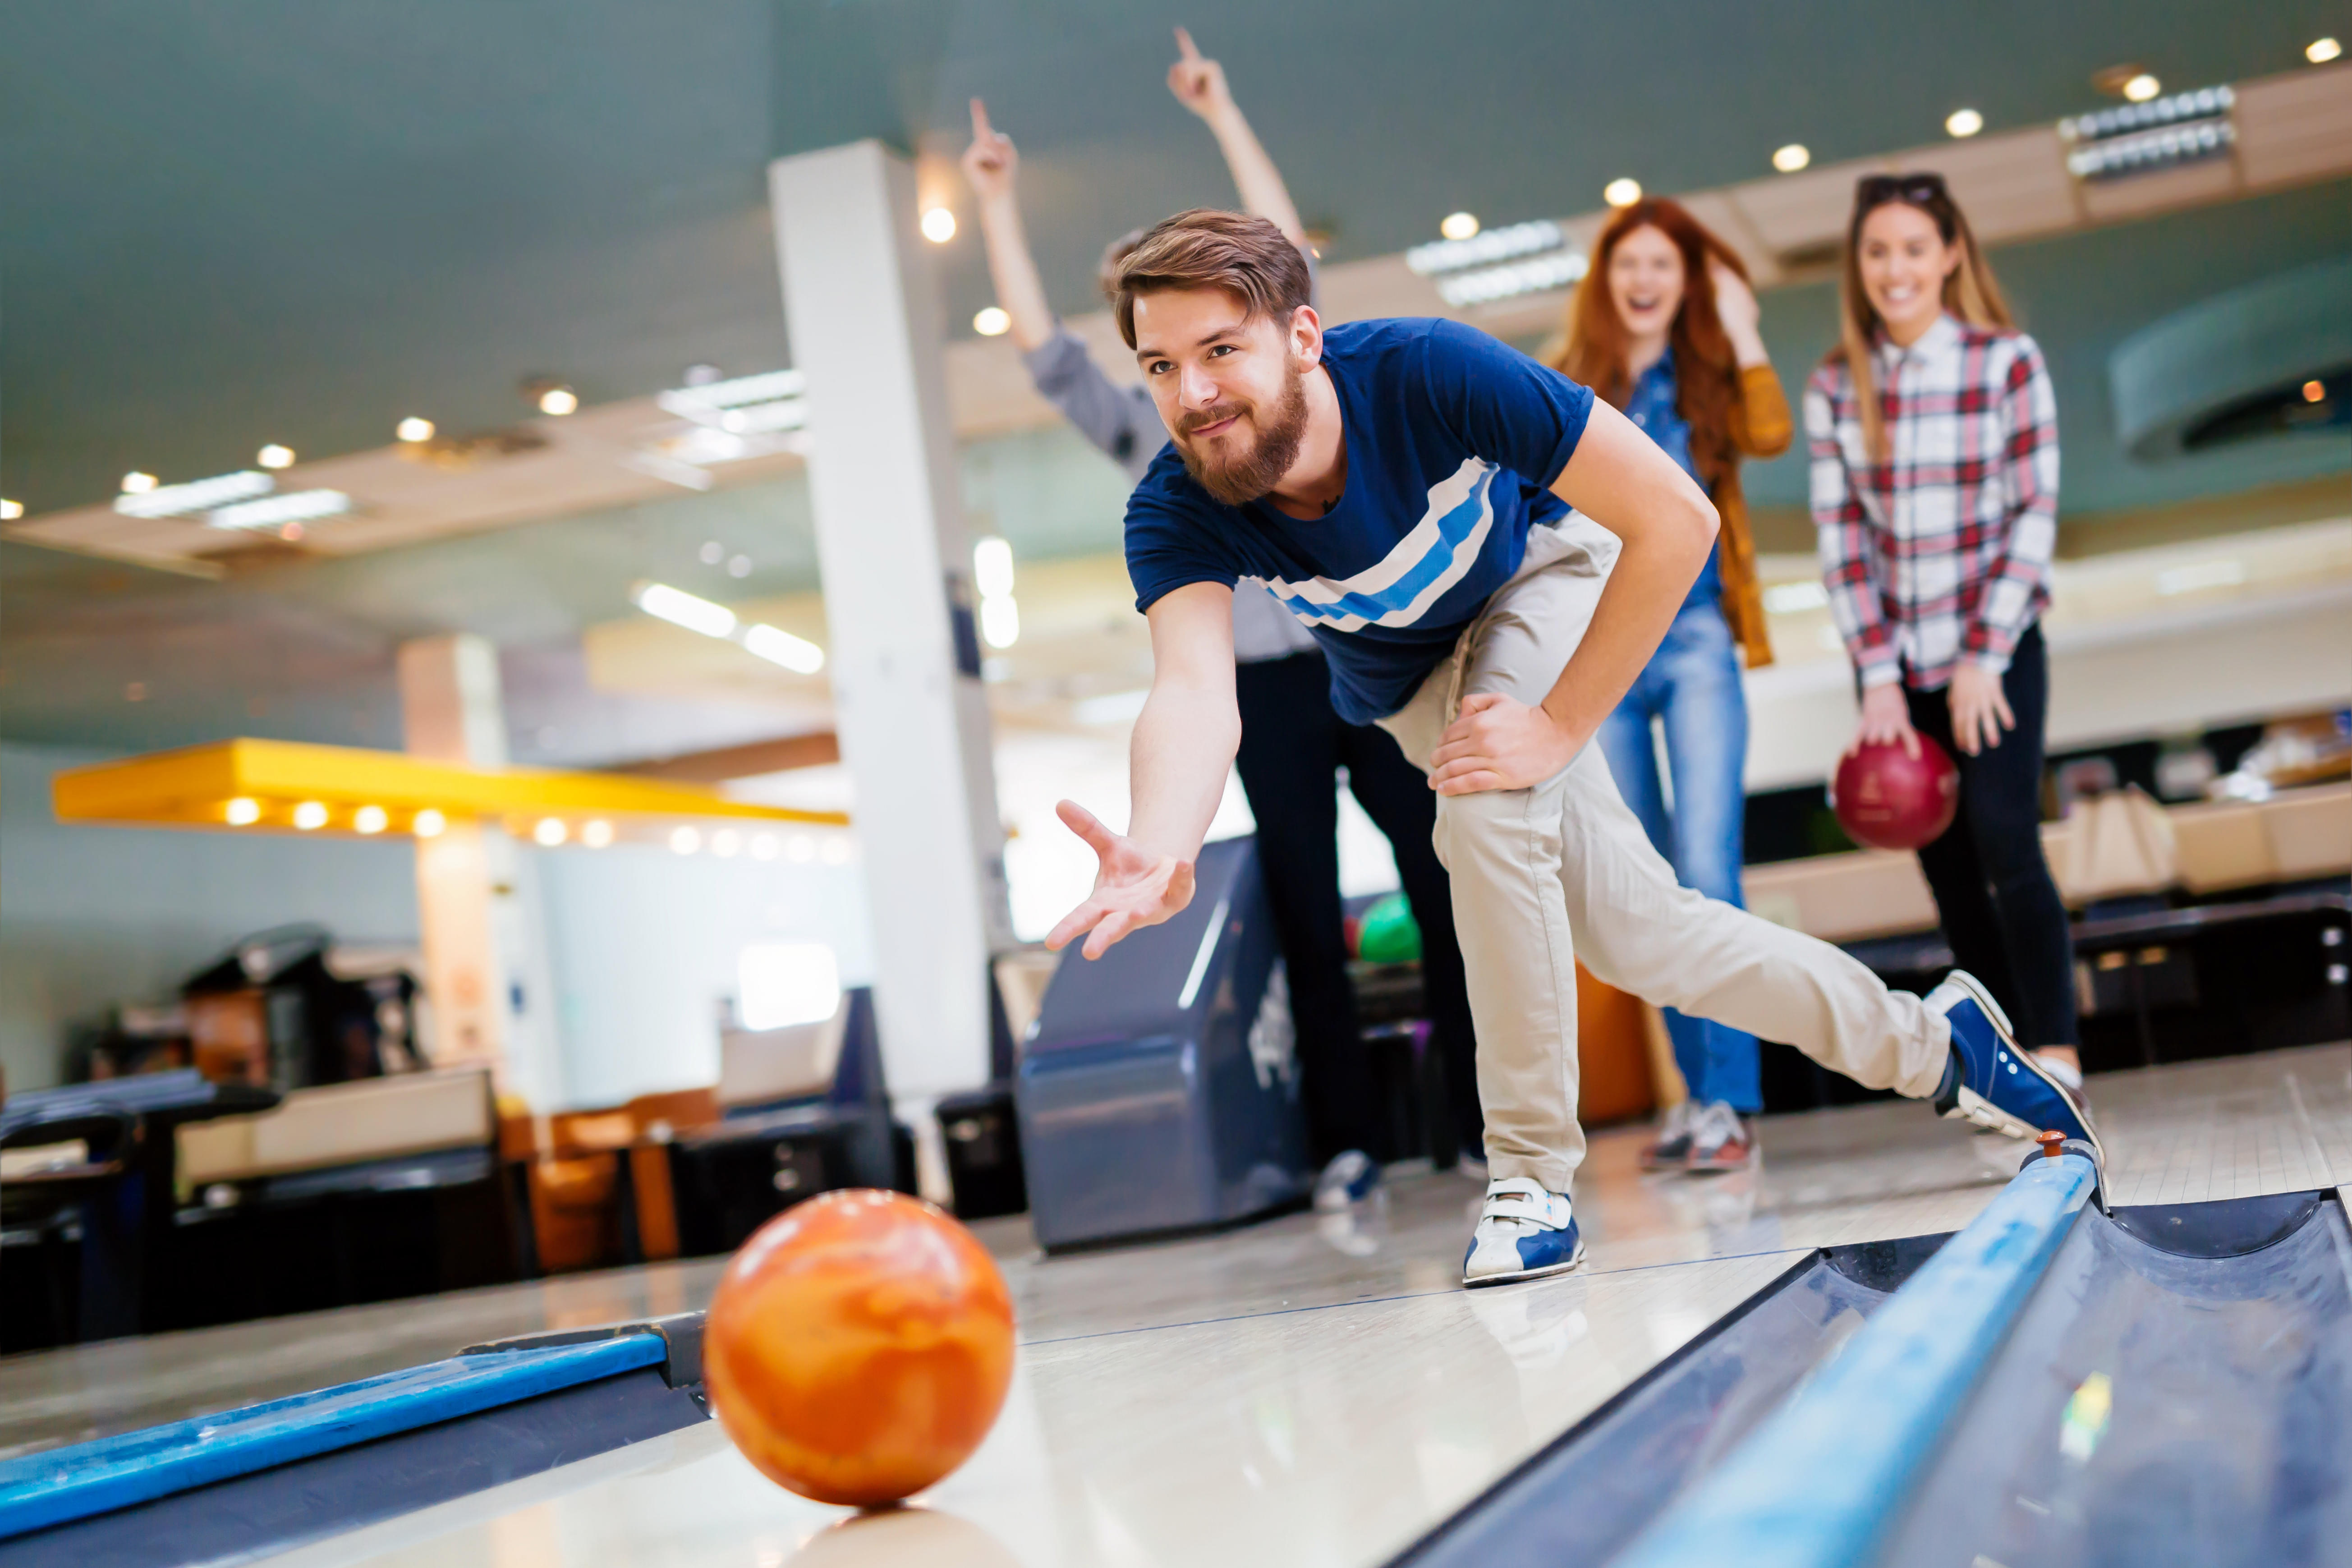 Bowling In Mumbai ₹350 Only Book Online and Save 30%